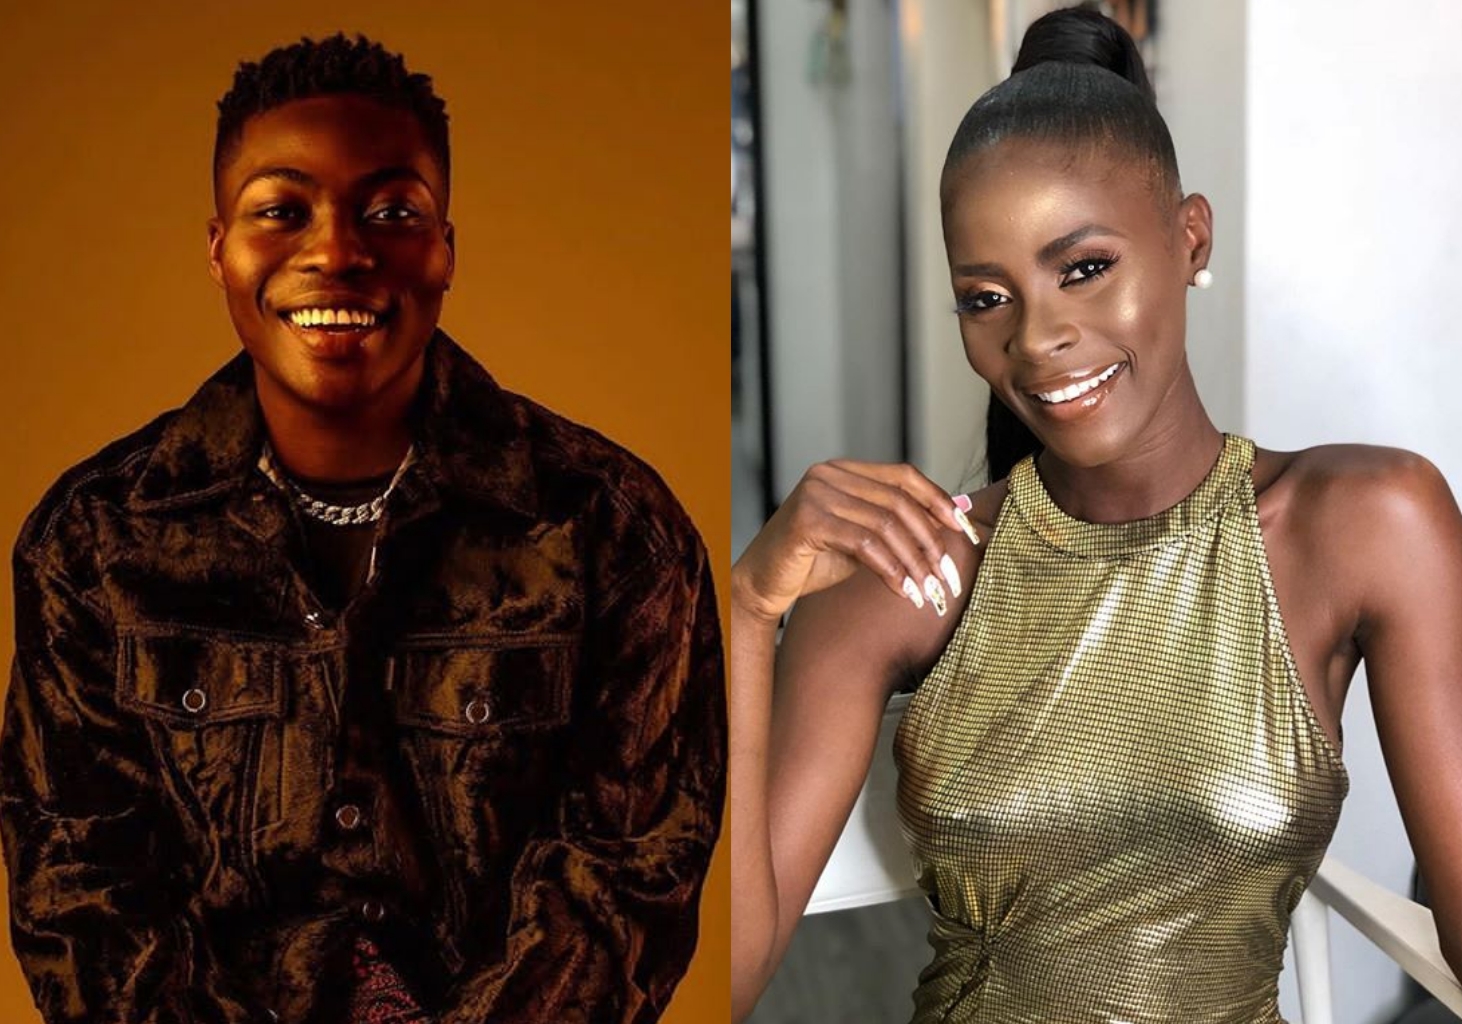 "Your body na full course" – Reekado Banks gush about Khloe's hot body (Video)